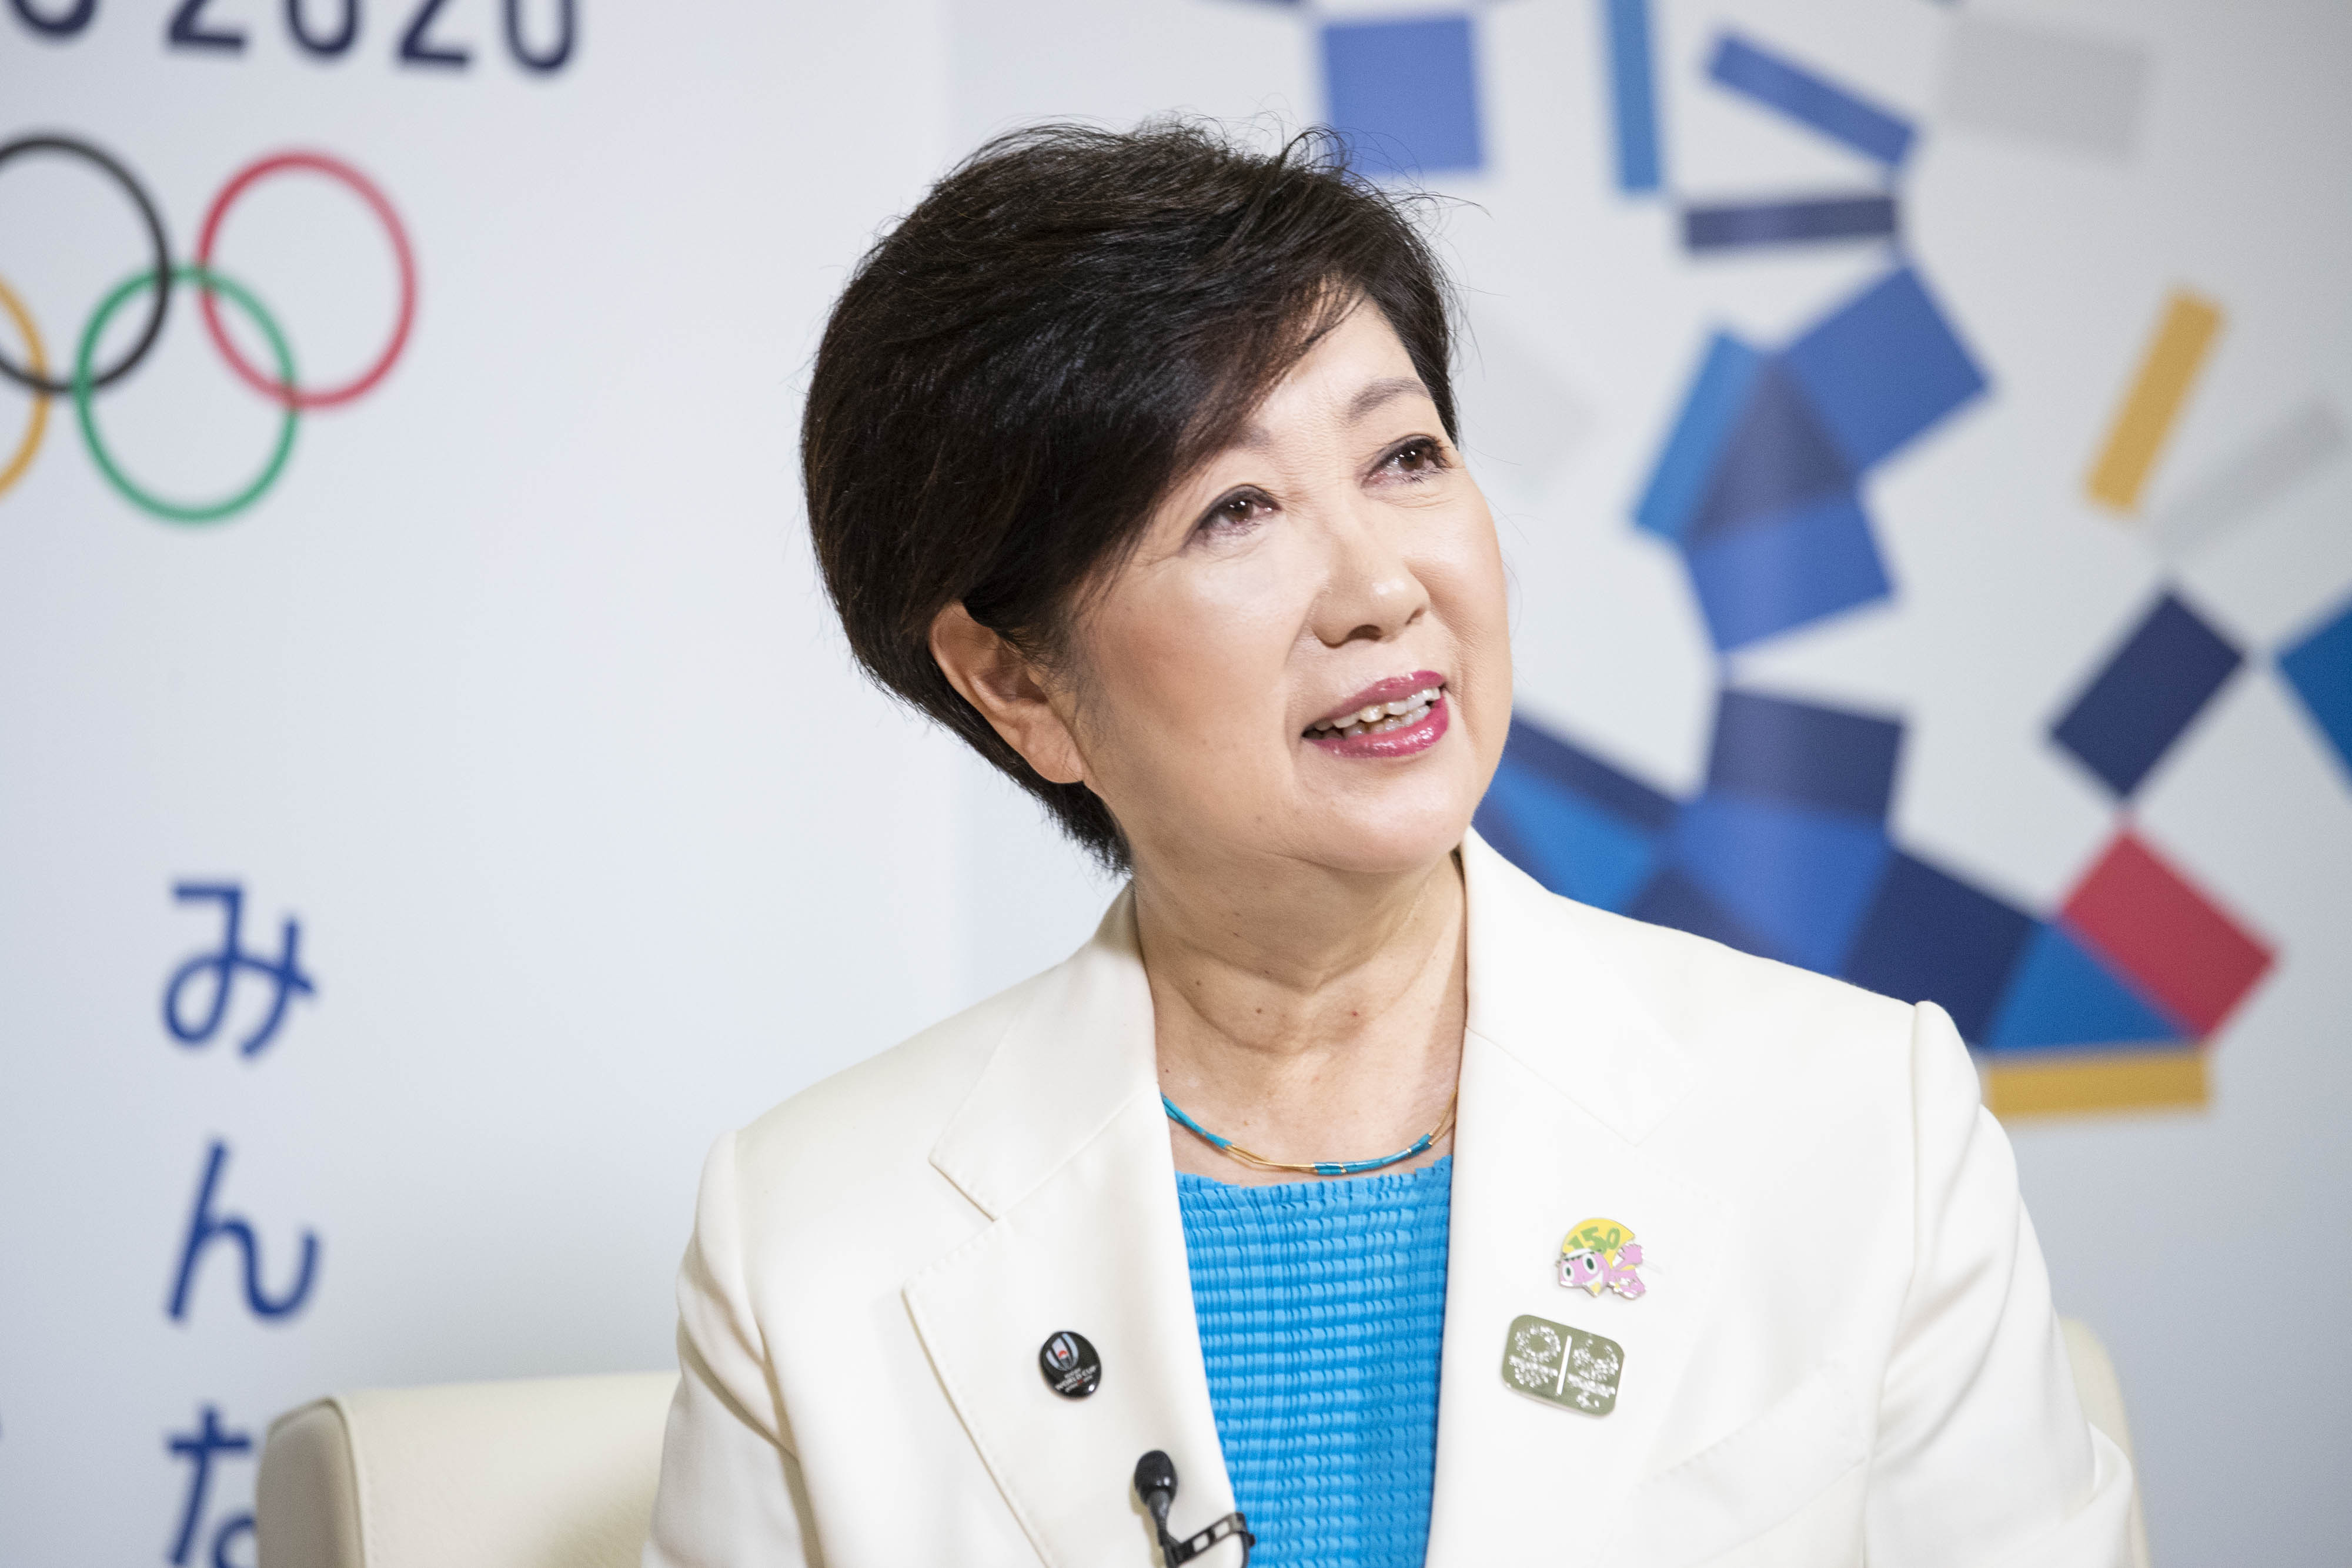 Tokyo Governor Koike to Run for Re-Election in July, Paper Says - Bloomberg